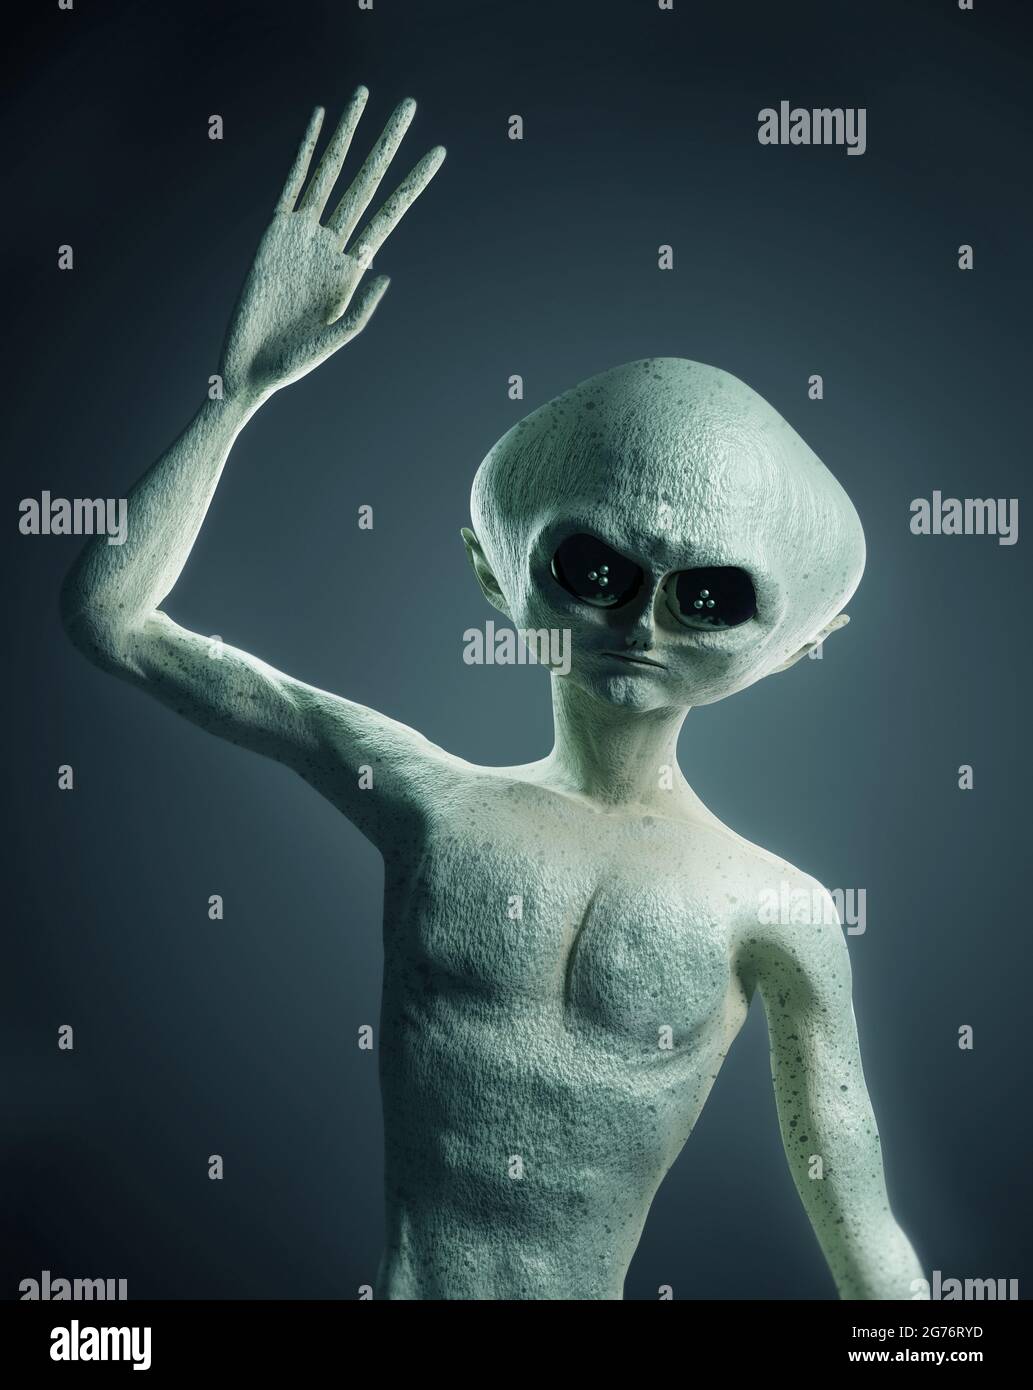 Portrait of a humanoid alien life form character waving. 3D illustration Stock Photo